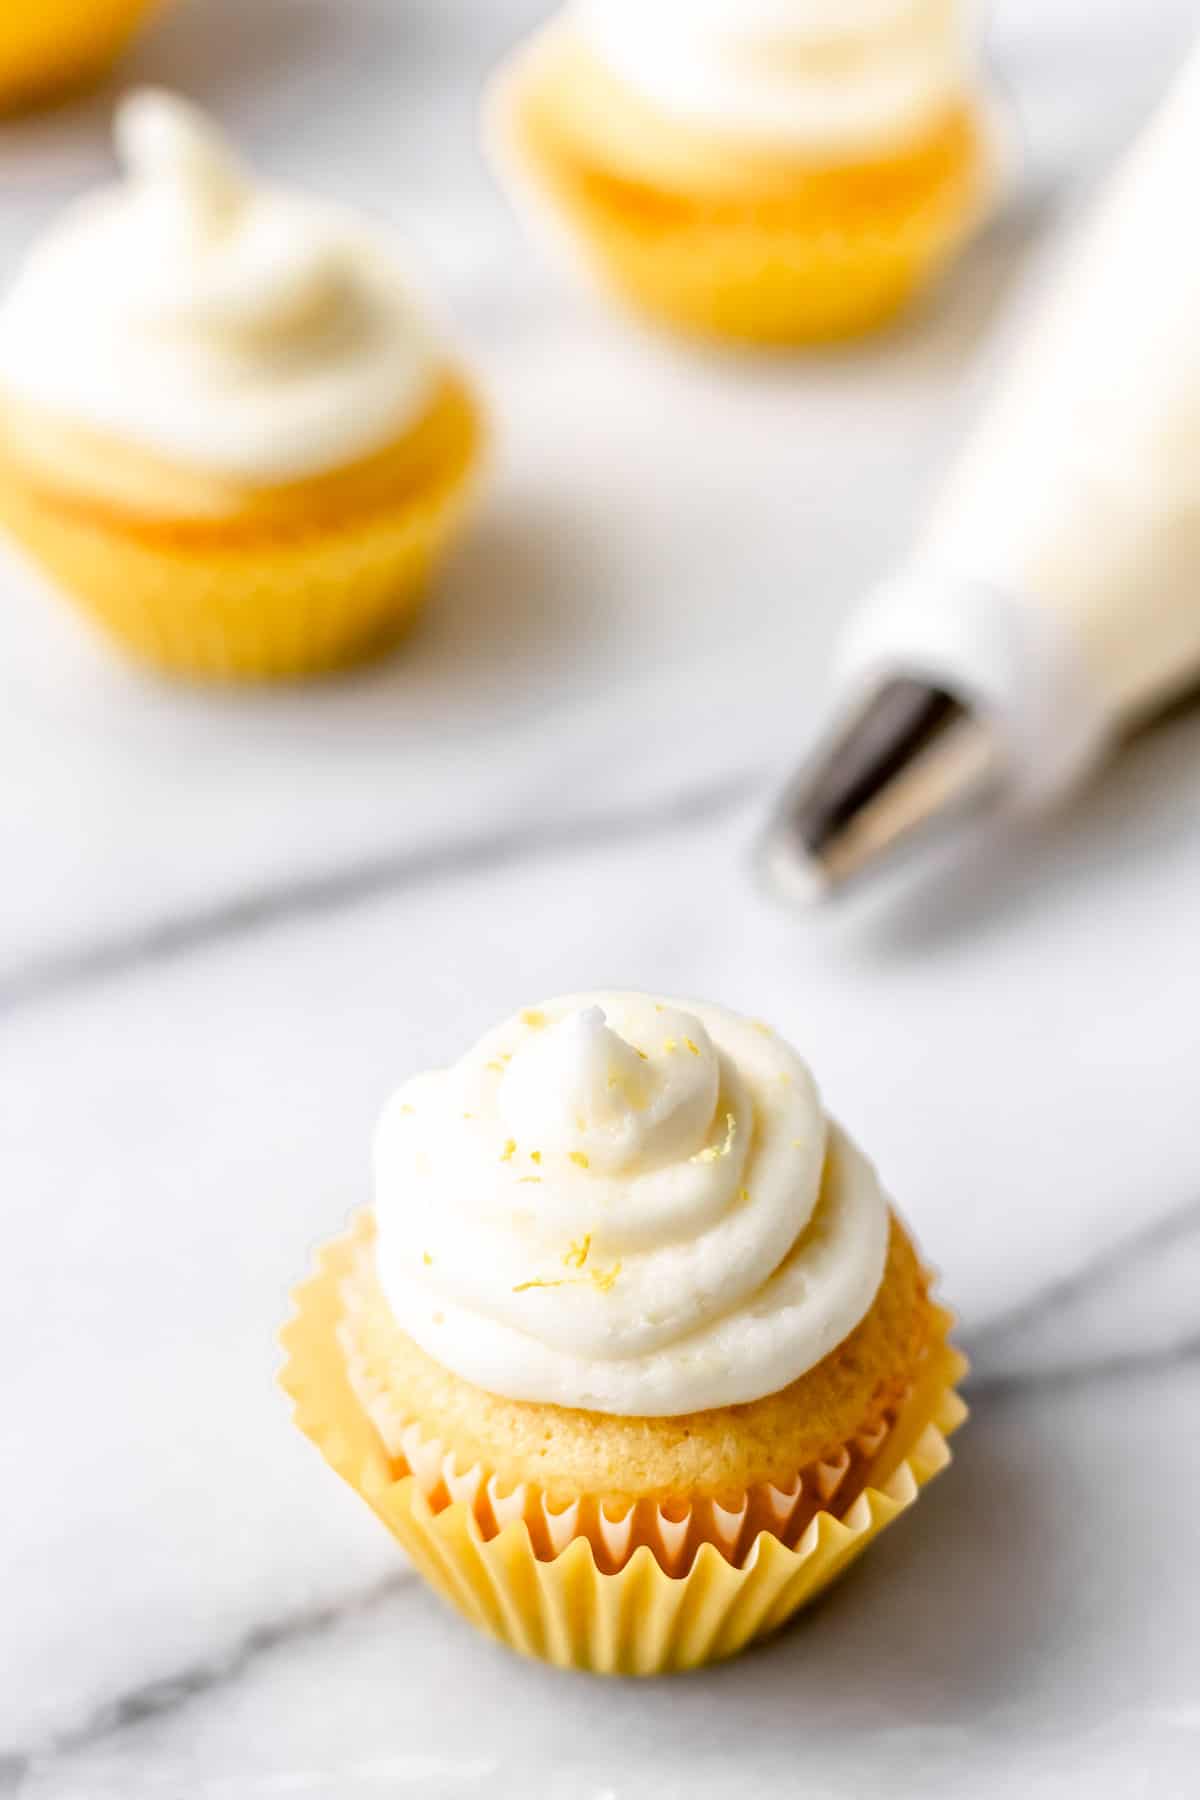 A cupcake with Lemon Buttercream Frosting piped onto it with the piping bag and a few more cupcakes in the background.